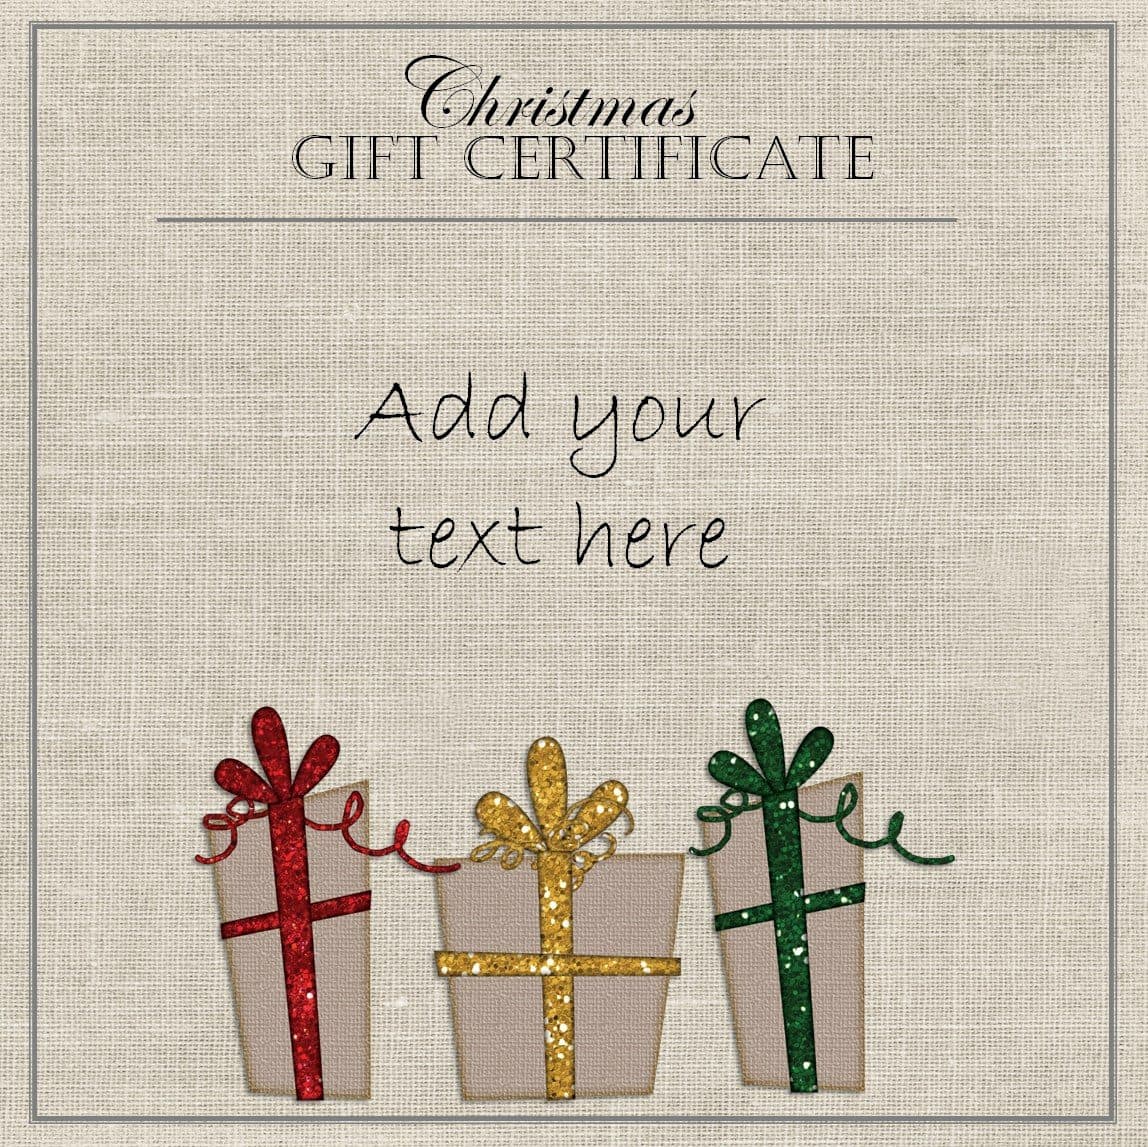 Powerpoint Christmas Gift Certificate Template Free - FREE PRINTABLE